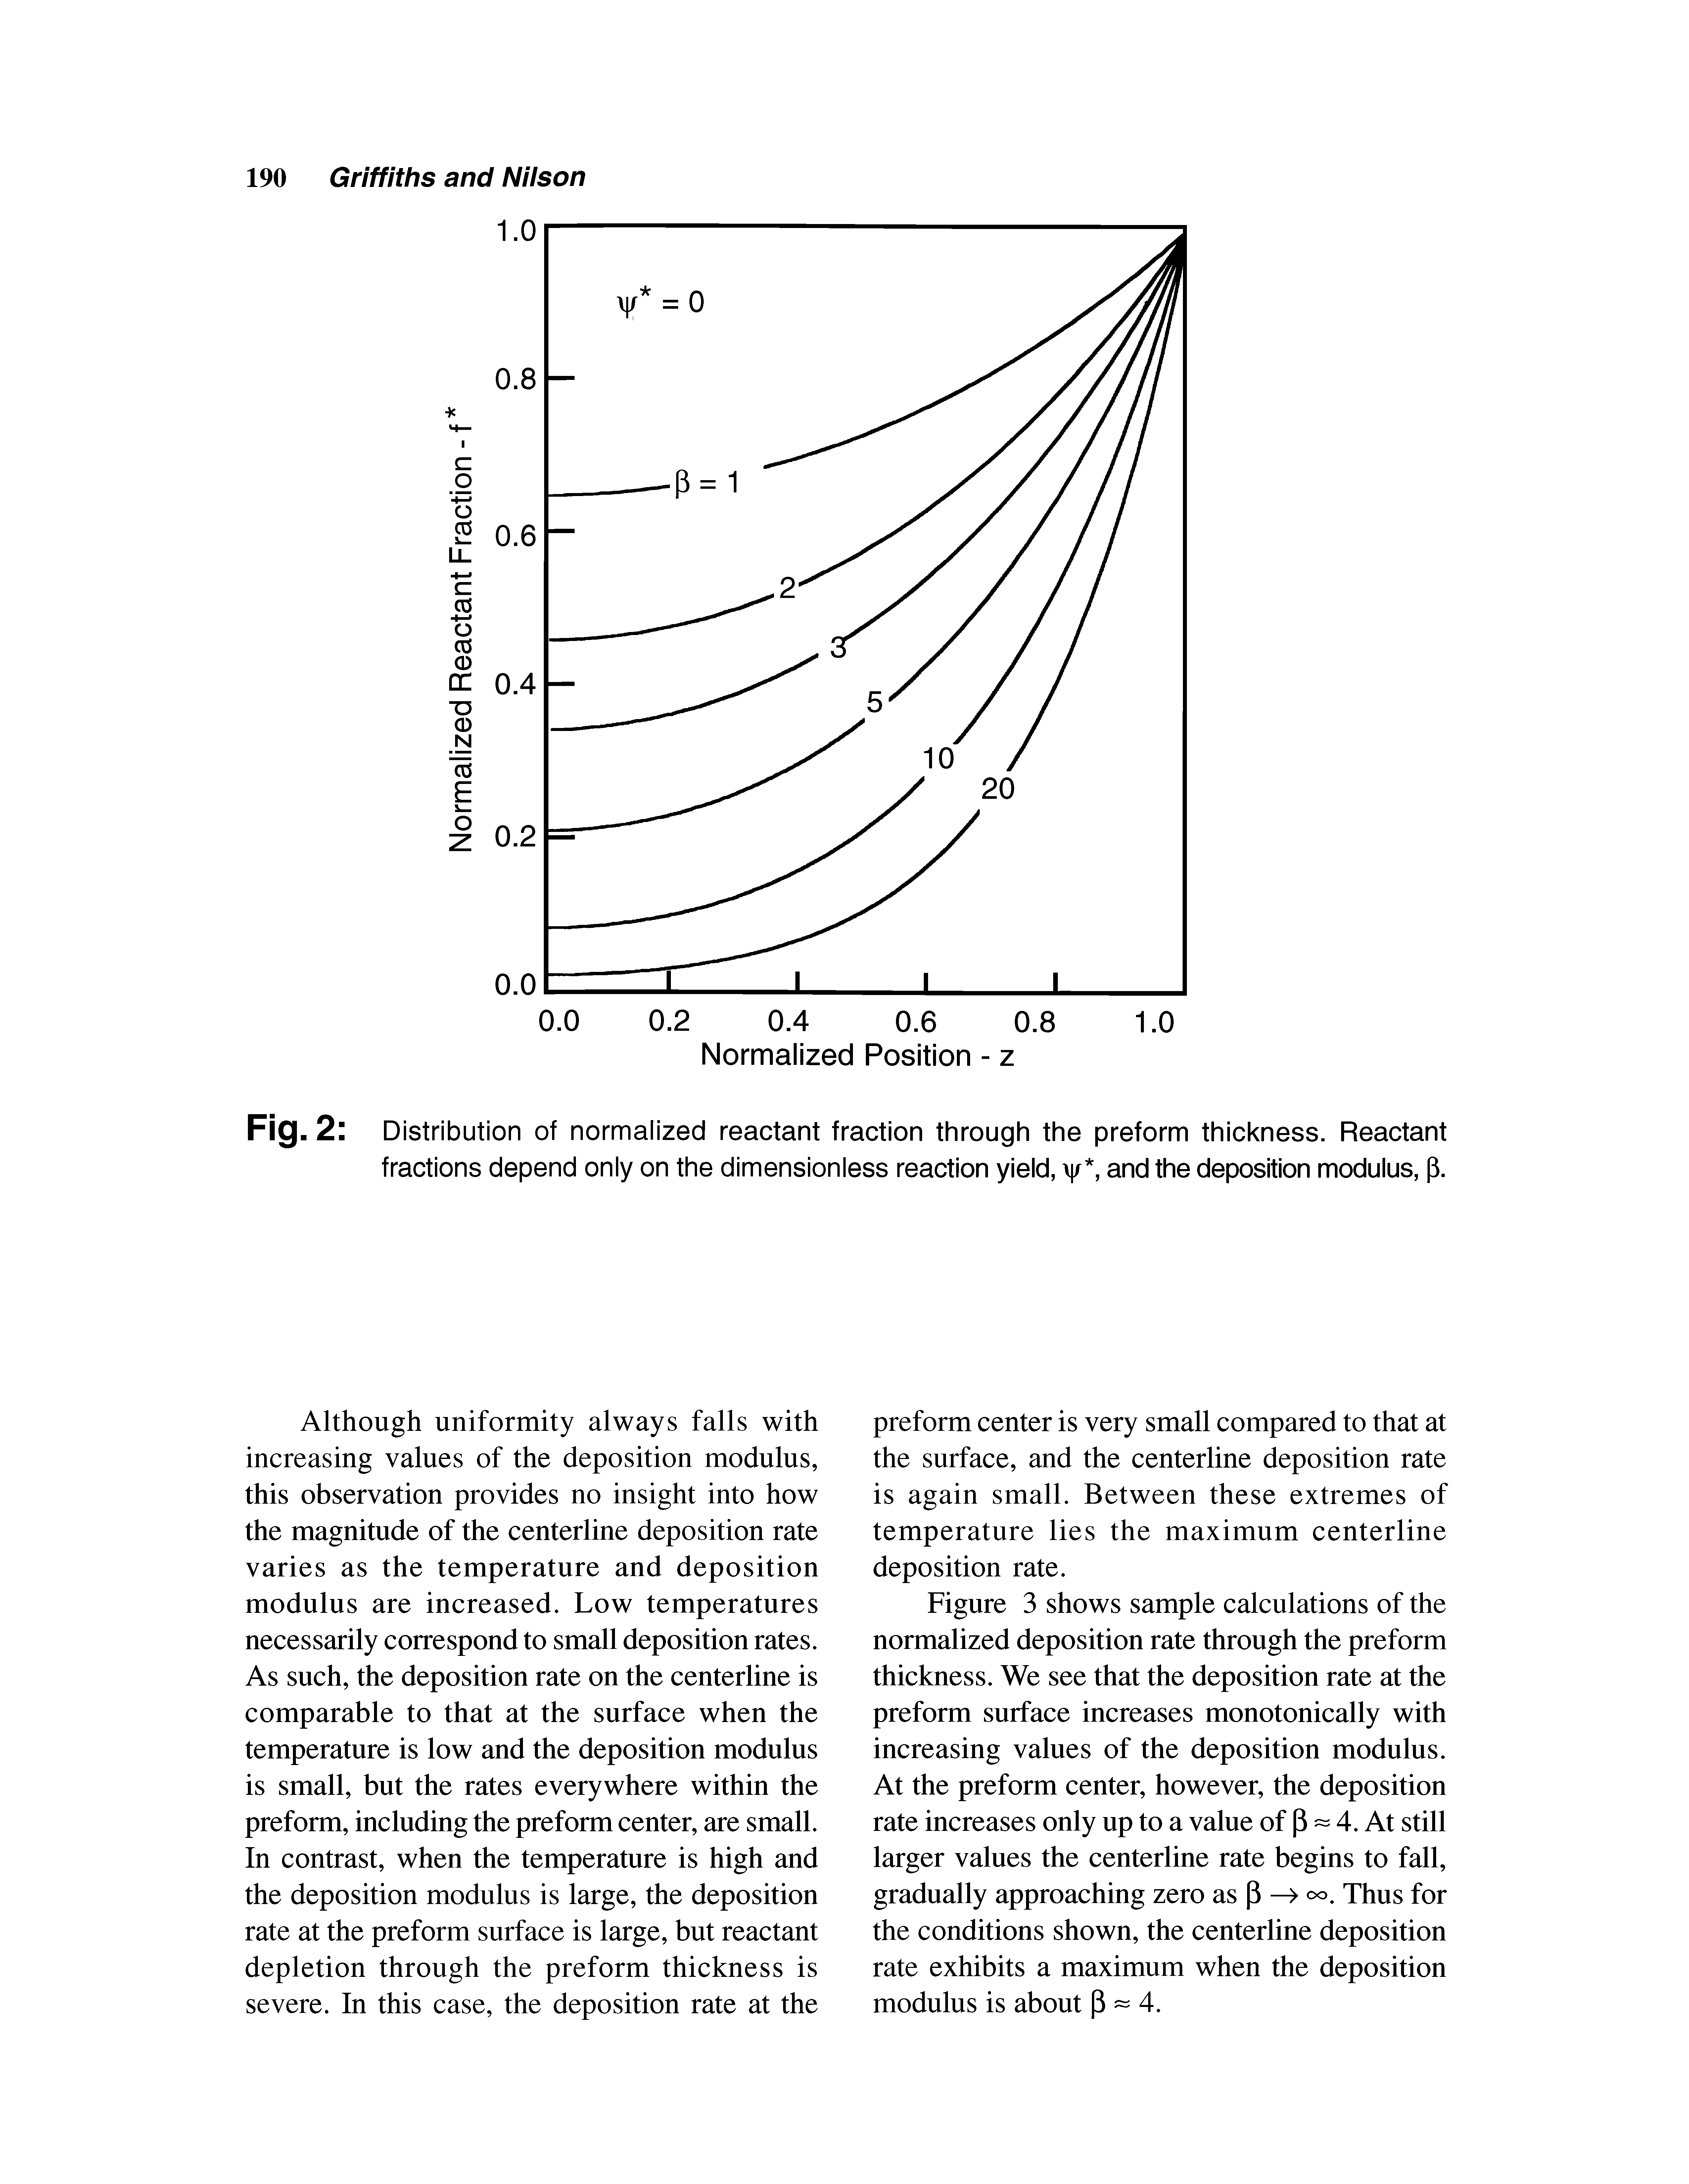 Fig. 2 Distribution of normalized reactant fraction through the preform thickness. Reactant fractions depend only on the dimensionless reaction yield, /, and the deposition modulus, p.